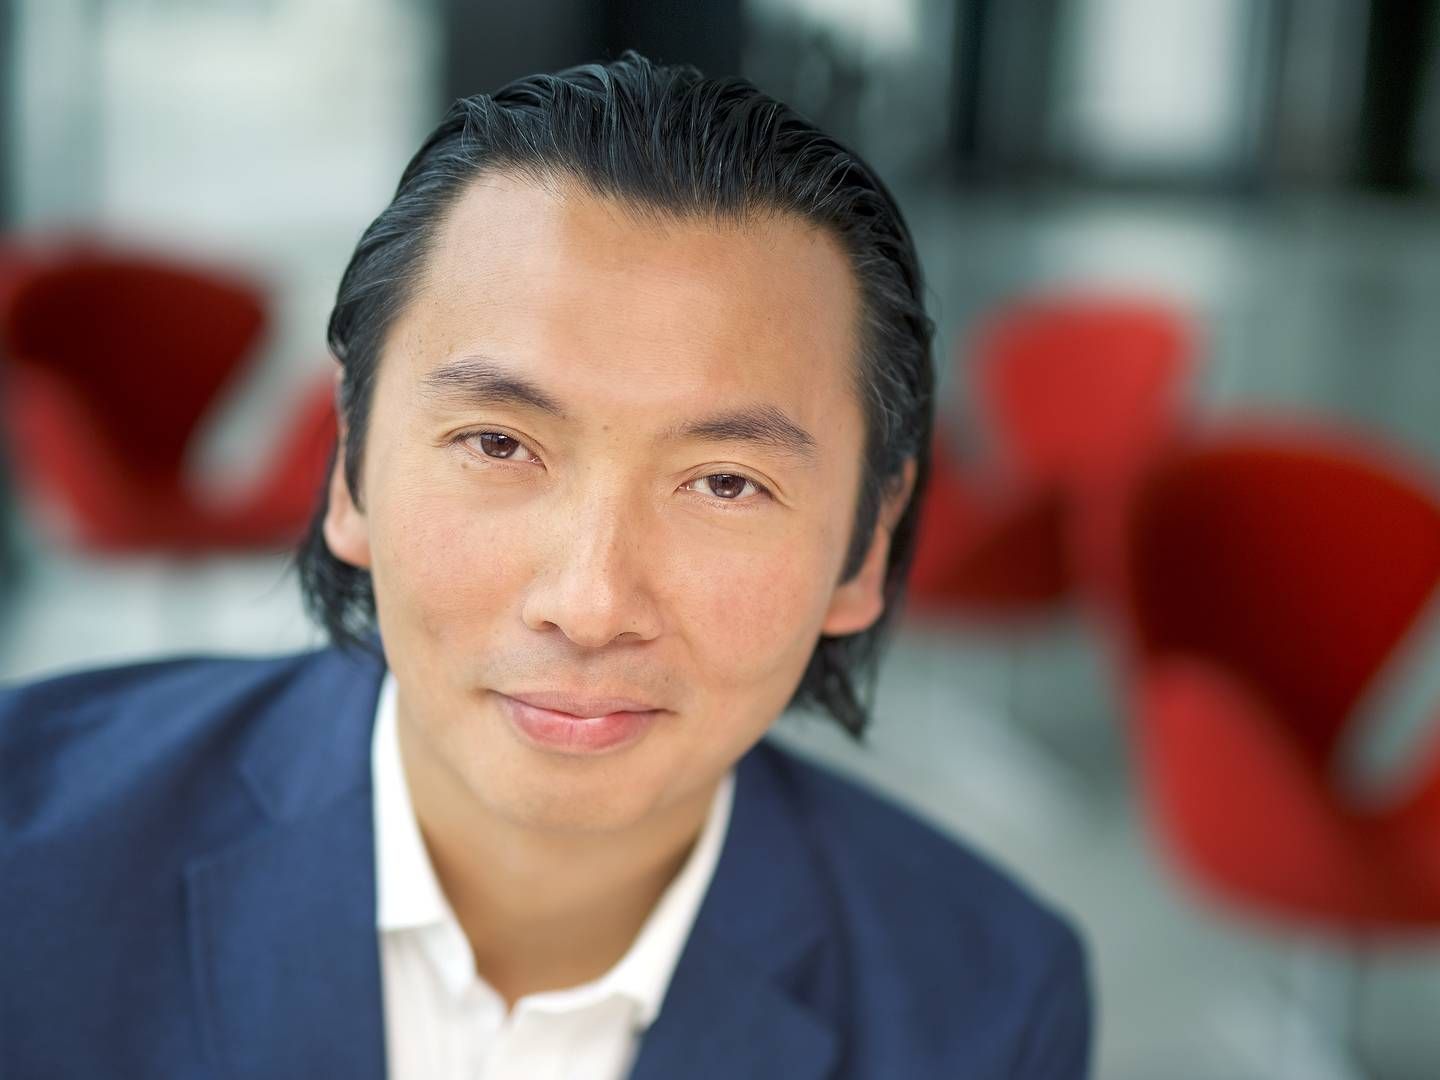 Storebrand Asset Management's Head of Allocation and Global Fixed income Olav Chen eyes a stronger NOK in the near-term. | Photo: CF Wesenberg / Kolonihaven.no